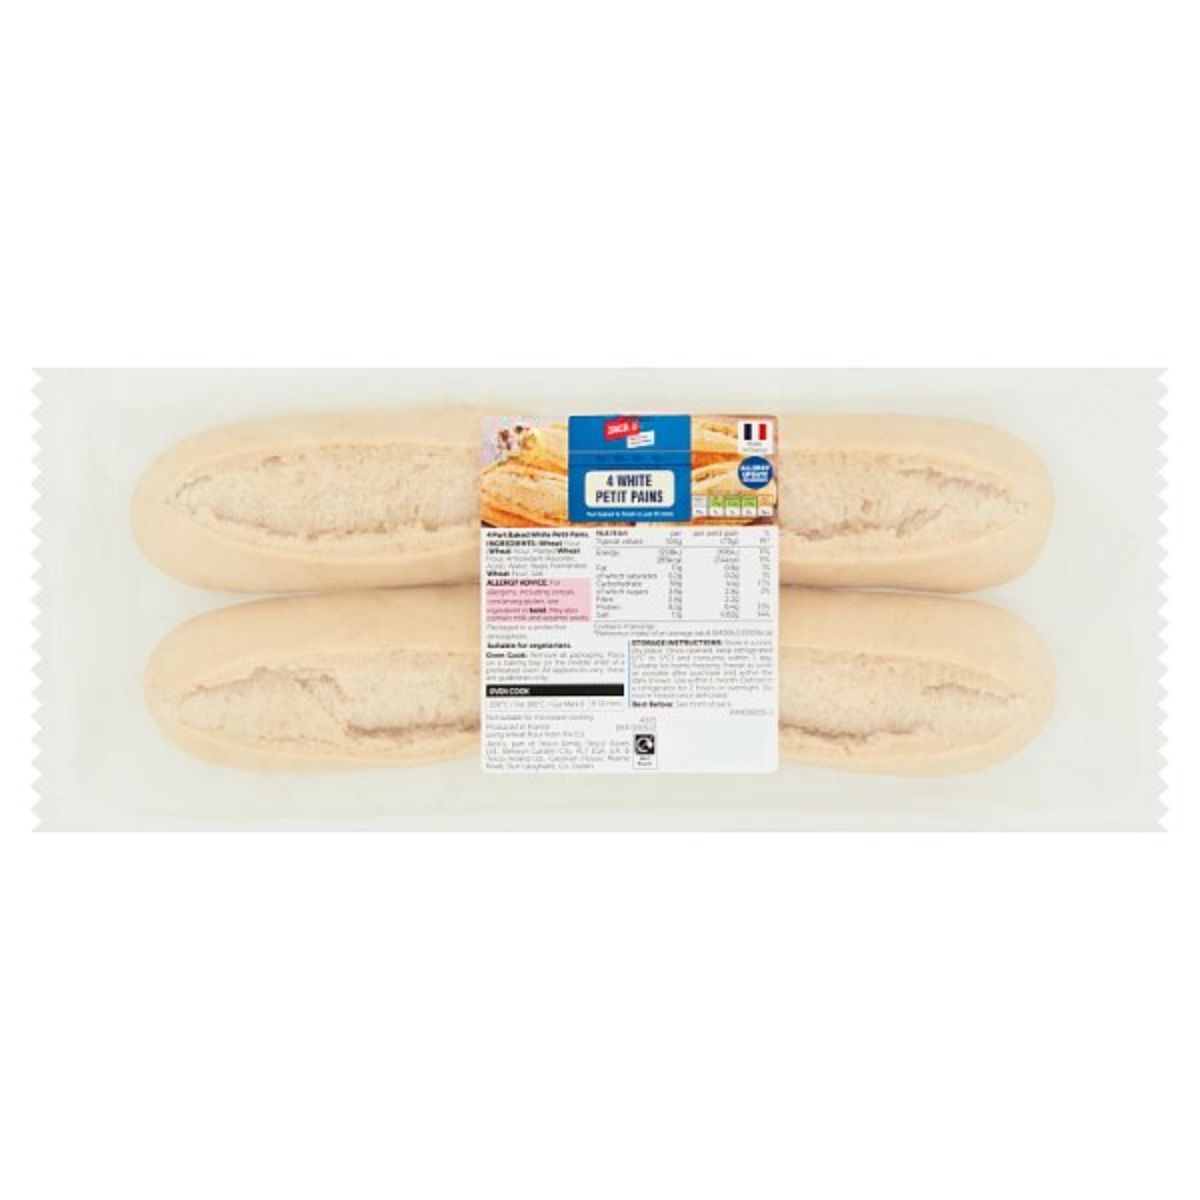 A package of Jacks - White Petit Pain - 4 Pack on a white background.